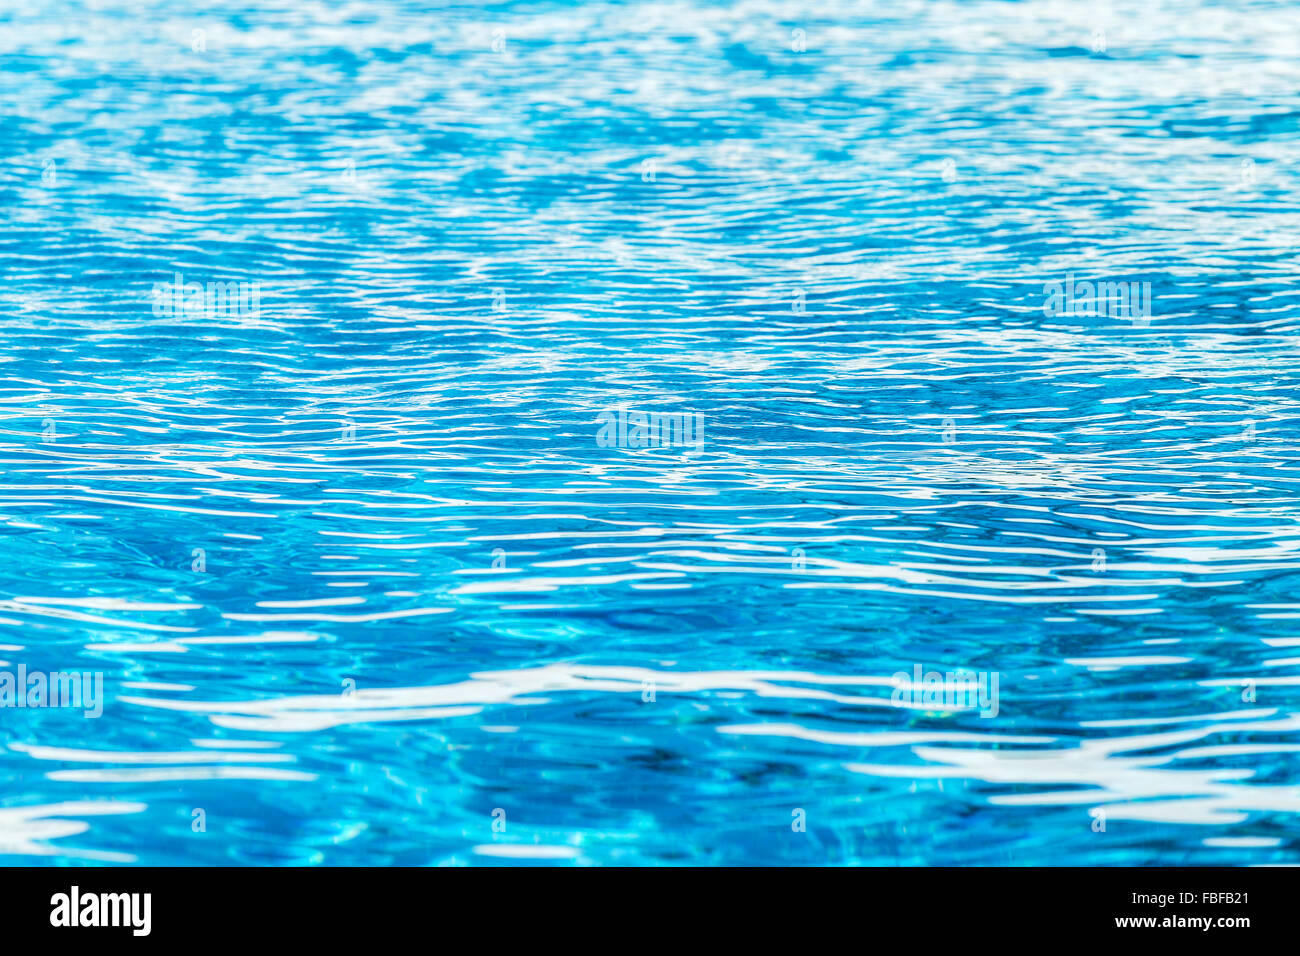 Ripples on the water in the swimming pool. Stock Photo